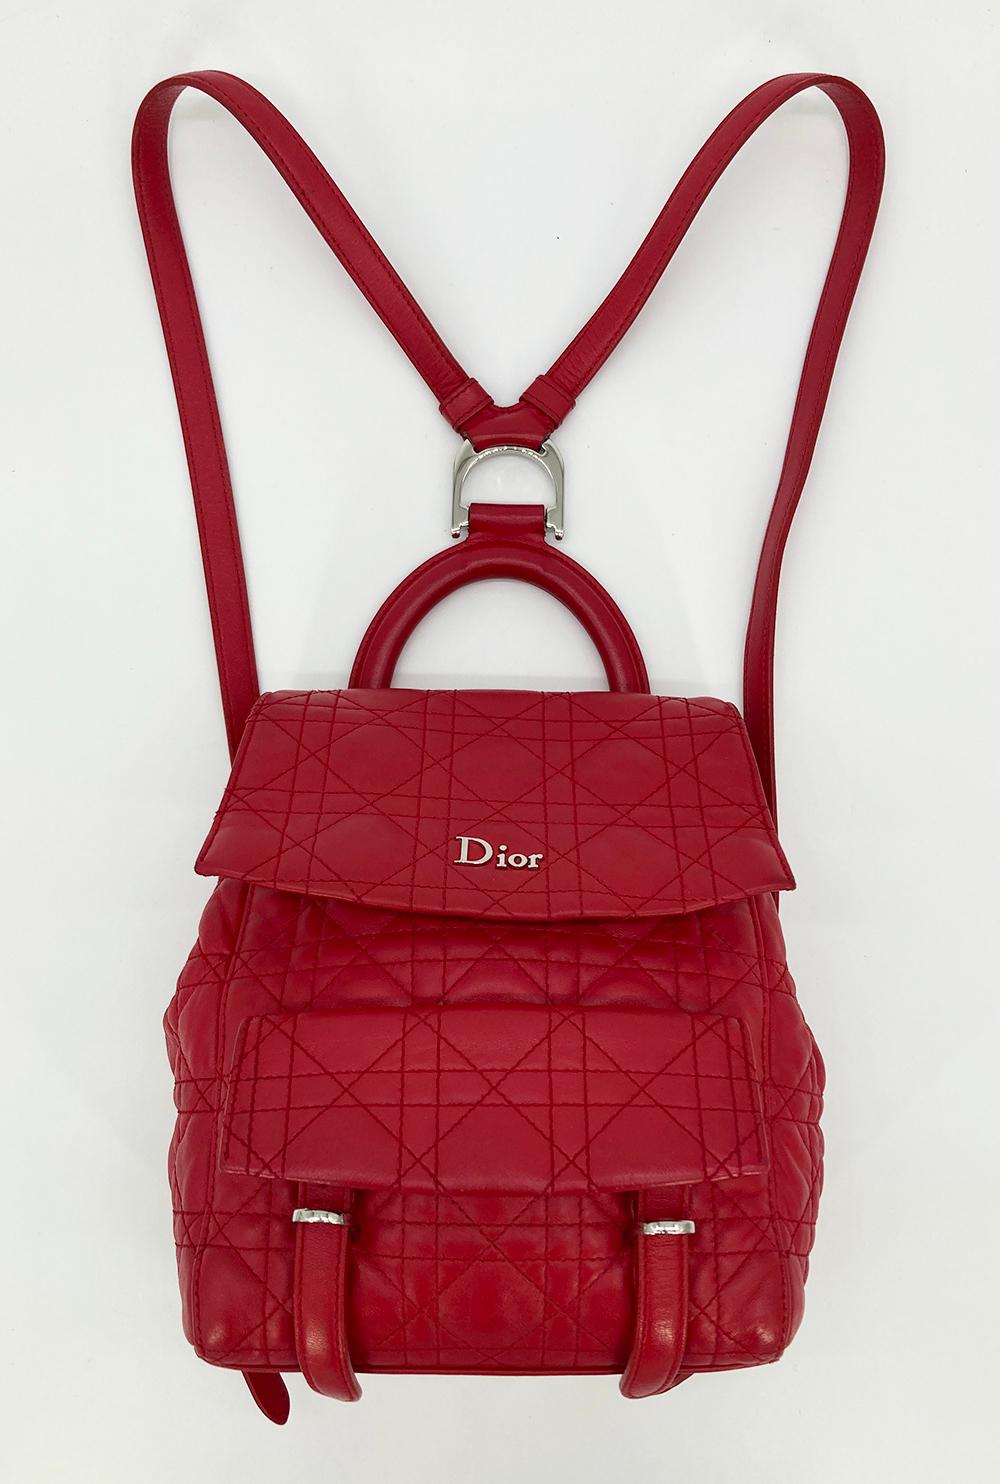 Christian Dior Red Cannage Quilted Leather Stardust Backpack 2